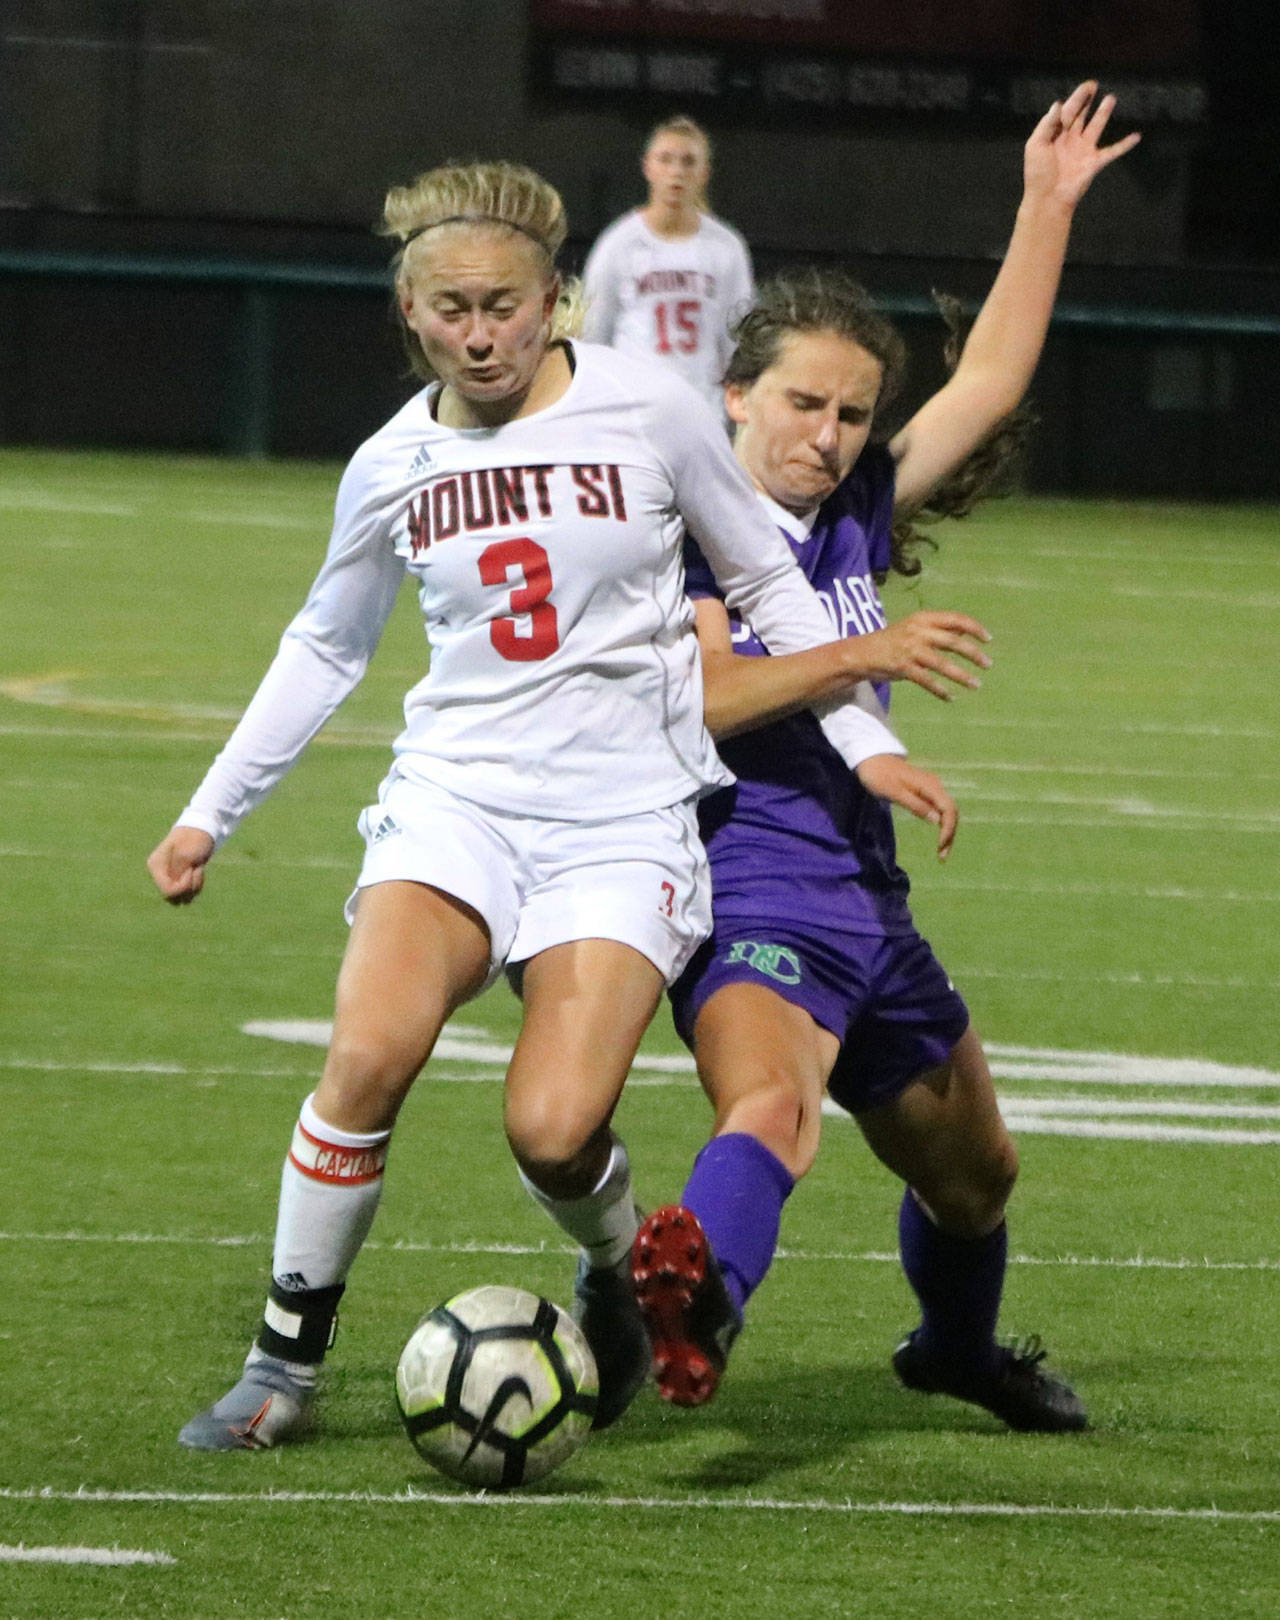 Mount Si’s Sarah Creighton (3) and North Creek’s Maddy Chriest battle for the ball on Oct. 1 at Pop Keeney Stadium. The match ended in a 0-0 draw. Andy Nystrom/ staff photo